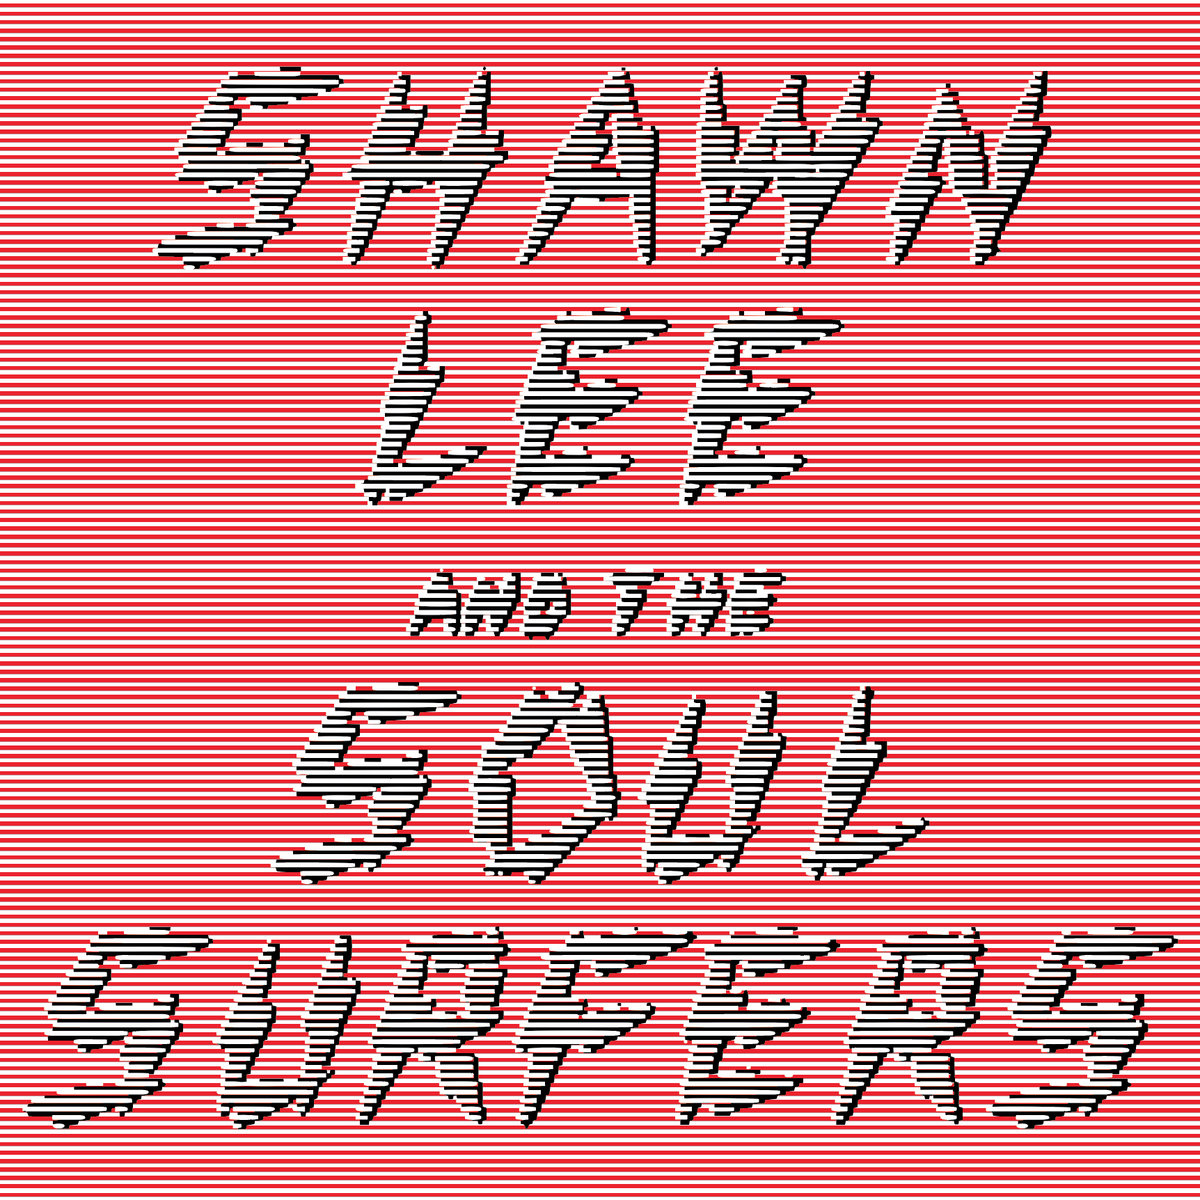 Shawn Lee & The Soul Surfers - Shawn Lee And The Soul Surfers (2018)